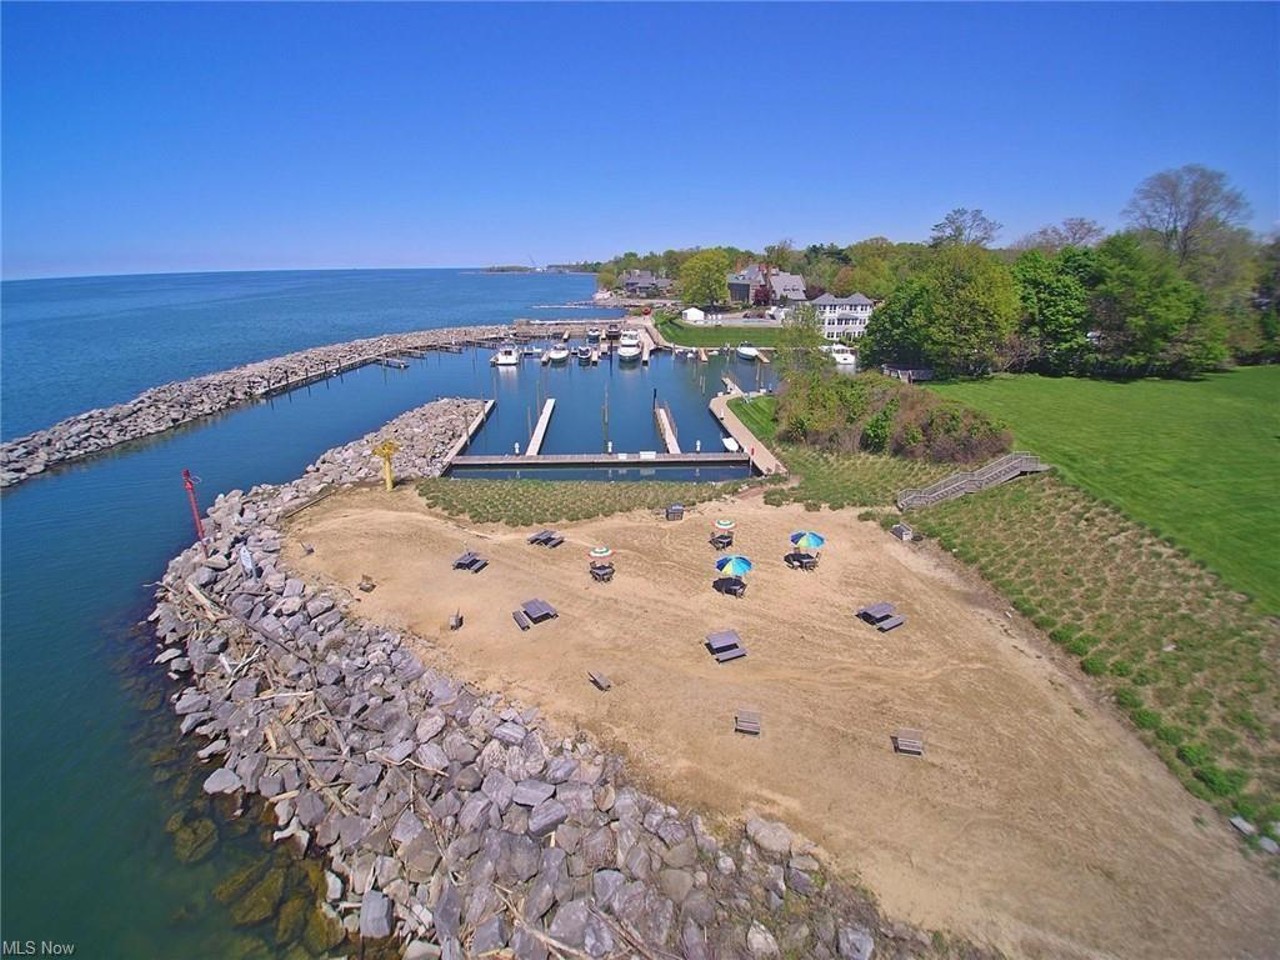 This $4.5 Million Lakeside Mansion Is Extravagant And Has A Big, Private Beach